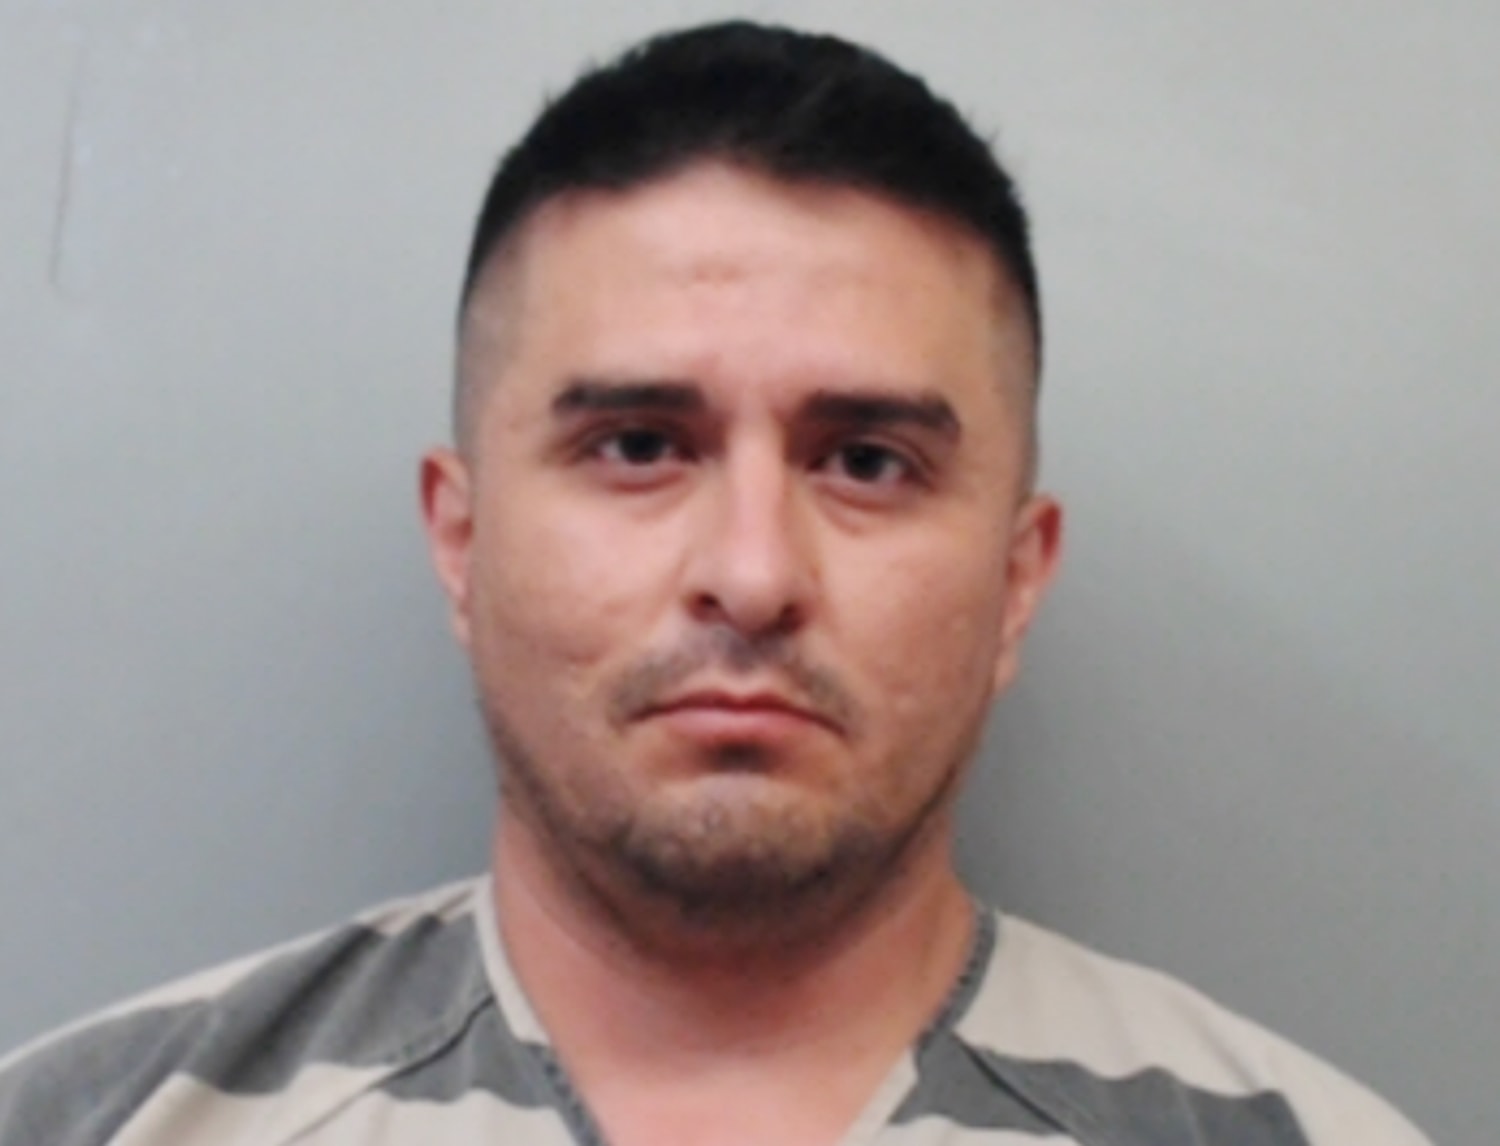 Border Patrol Forced Sex - Border Patrol agent Juan David Ortiz indicted on capital murder charge in  deaths of four women